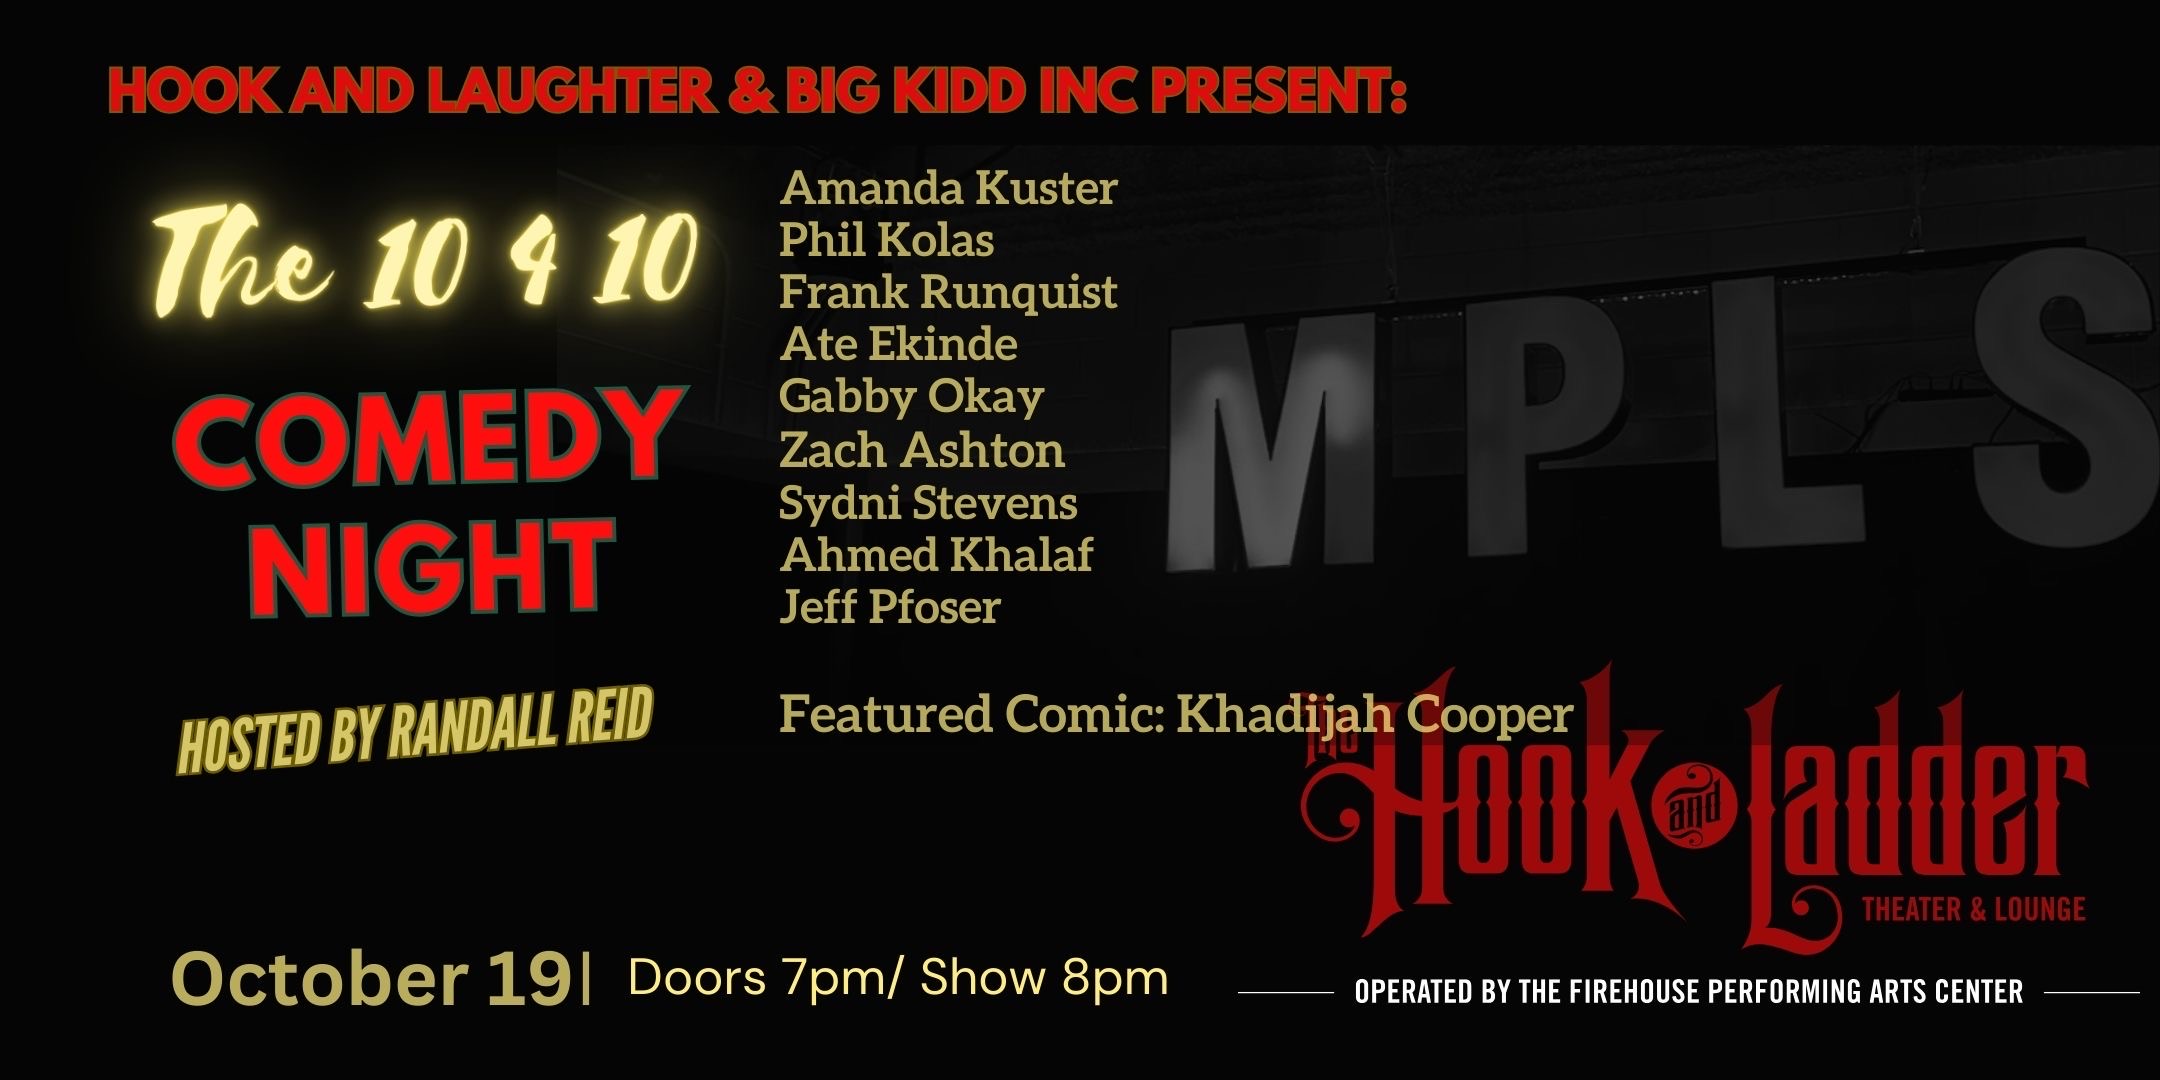 Hook and Laughter and BIGG KIDD INC Present: 'The 10 4 10 Comedy Night' with Amanda Kuster, Phil Kolas, Franky Runquist, Ate Ekinde, Gabby Okay, Zach Ashton, Sydni Stephens, Ahmed Khalaf, Jeff Pfoser, and featured comic, Khadijah Cooper! Thursday, October 19 The Hook and Ladder Theater Doors 7:00pm :: Music 8:00pm :: 21+ ----- GA Seat: $25* Standing Room Only (SRO): $10 ADV / $15 DOS Hook and Laughter and BIGG KIDD INC Present: 'The 10 4 10 Comedy Night' with Amanda Kuster, Phil Kolas, Franky Runquist, Ate Ekinde, Gabby Okay, Zach Ashton, Sydni Stephens, Ahmed Khalaf, Jeff Pfoser, and featured comic, Khadijah Cooper! Thursday, October 19 The Hook and Ladder Theater Doors 7:00pm :: Music 8:00pm :: 21+ GA Seat: $25* Standing Room Only (SRO): $10 ADV / $15 DOS *Seating Available On A First-come First-served Basis